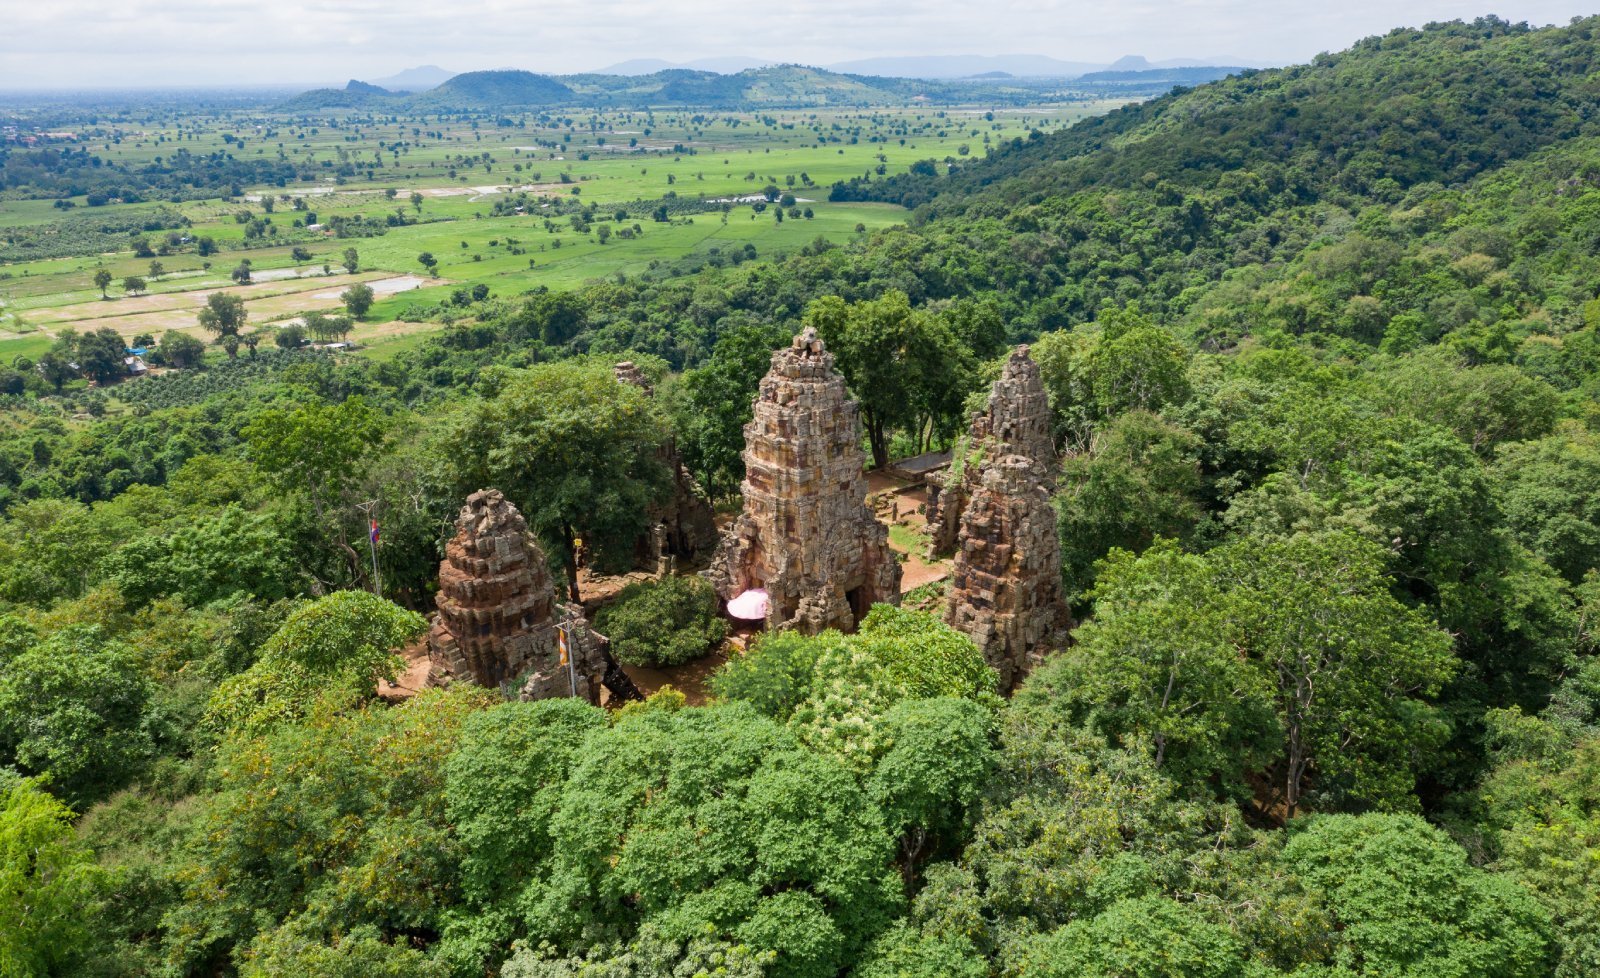 <p class="wp-caption-text">Image Credit: Shutterstock / Nhut Minh Ho</p>  <p><span>Battambang, Cambodia’s second-largest city, is known for its well-preserved French colonial architecture and its history as a former Khmer Rouge stronghold. Trekking tours in this region, led by veterans, offer a blend of natural beauty and historical exploration. The tours can include visits to Phnom Sampeau, a hill with stunning views and dark history as a site of Khmer Rouge killings, and the nearby Killing Caves. Veterans share their personal stories and historical insights, providing a deeper understanding of Cambodia’s tragic past and its journey toward healing and reconciliation.</span></p>